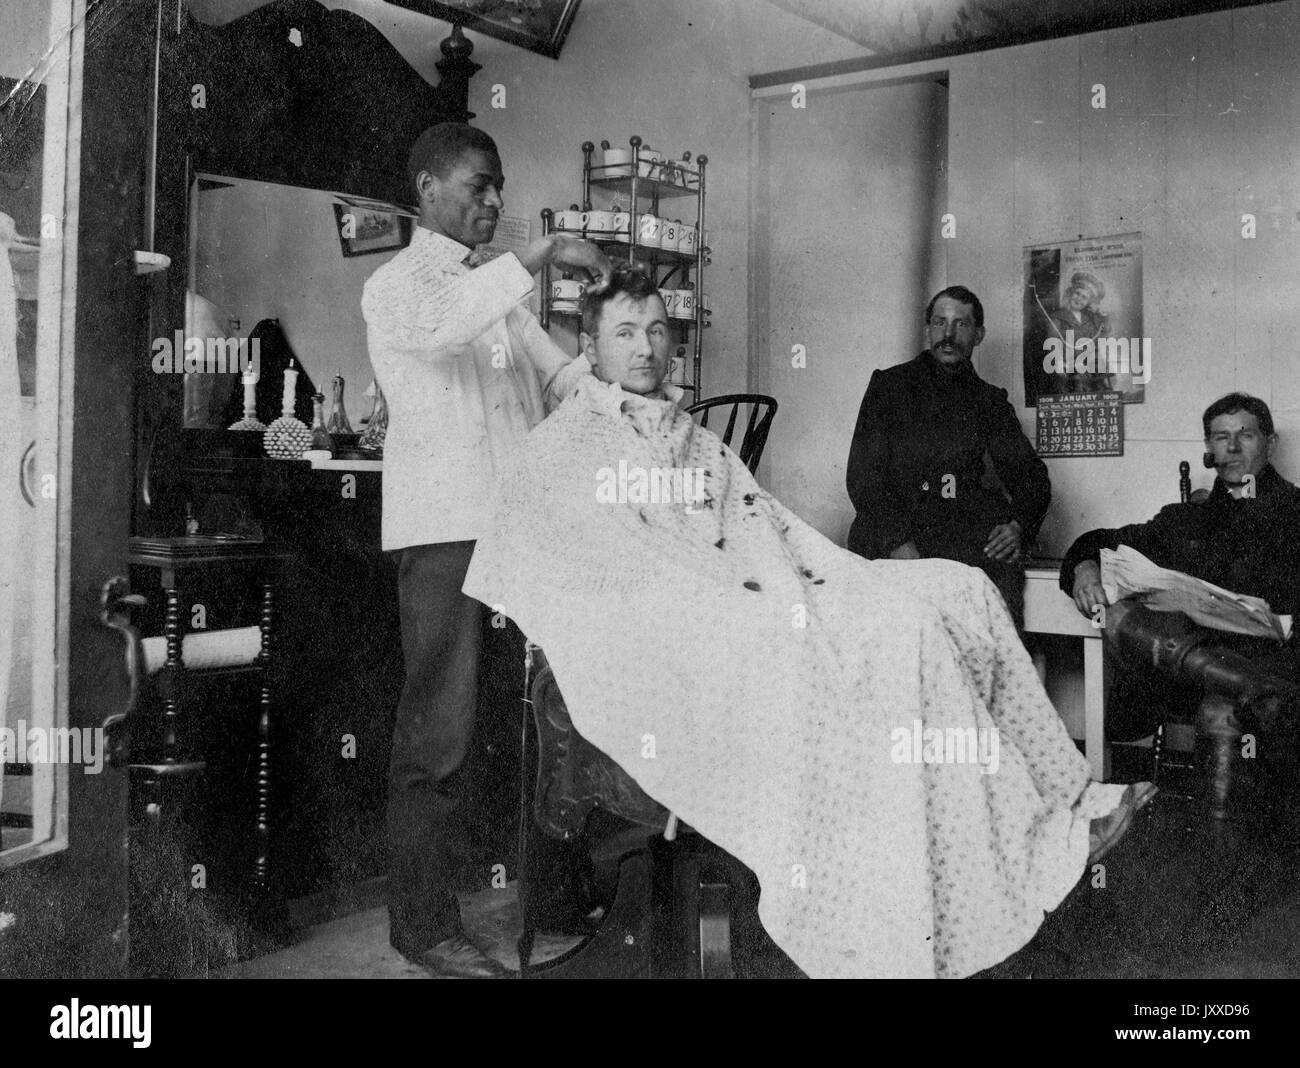 A group of mature men with neutral expressions, including one white patron  sitting in a barber chair, one African American barber cutting his hair,  and two white men who stand nearby, are